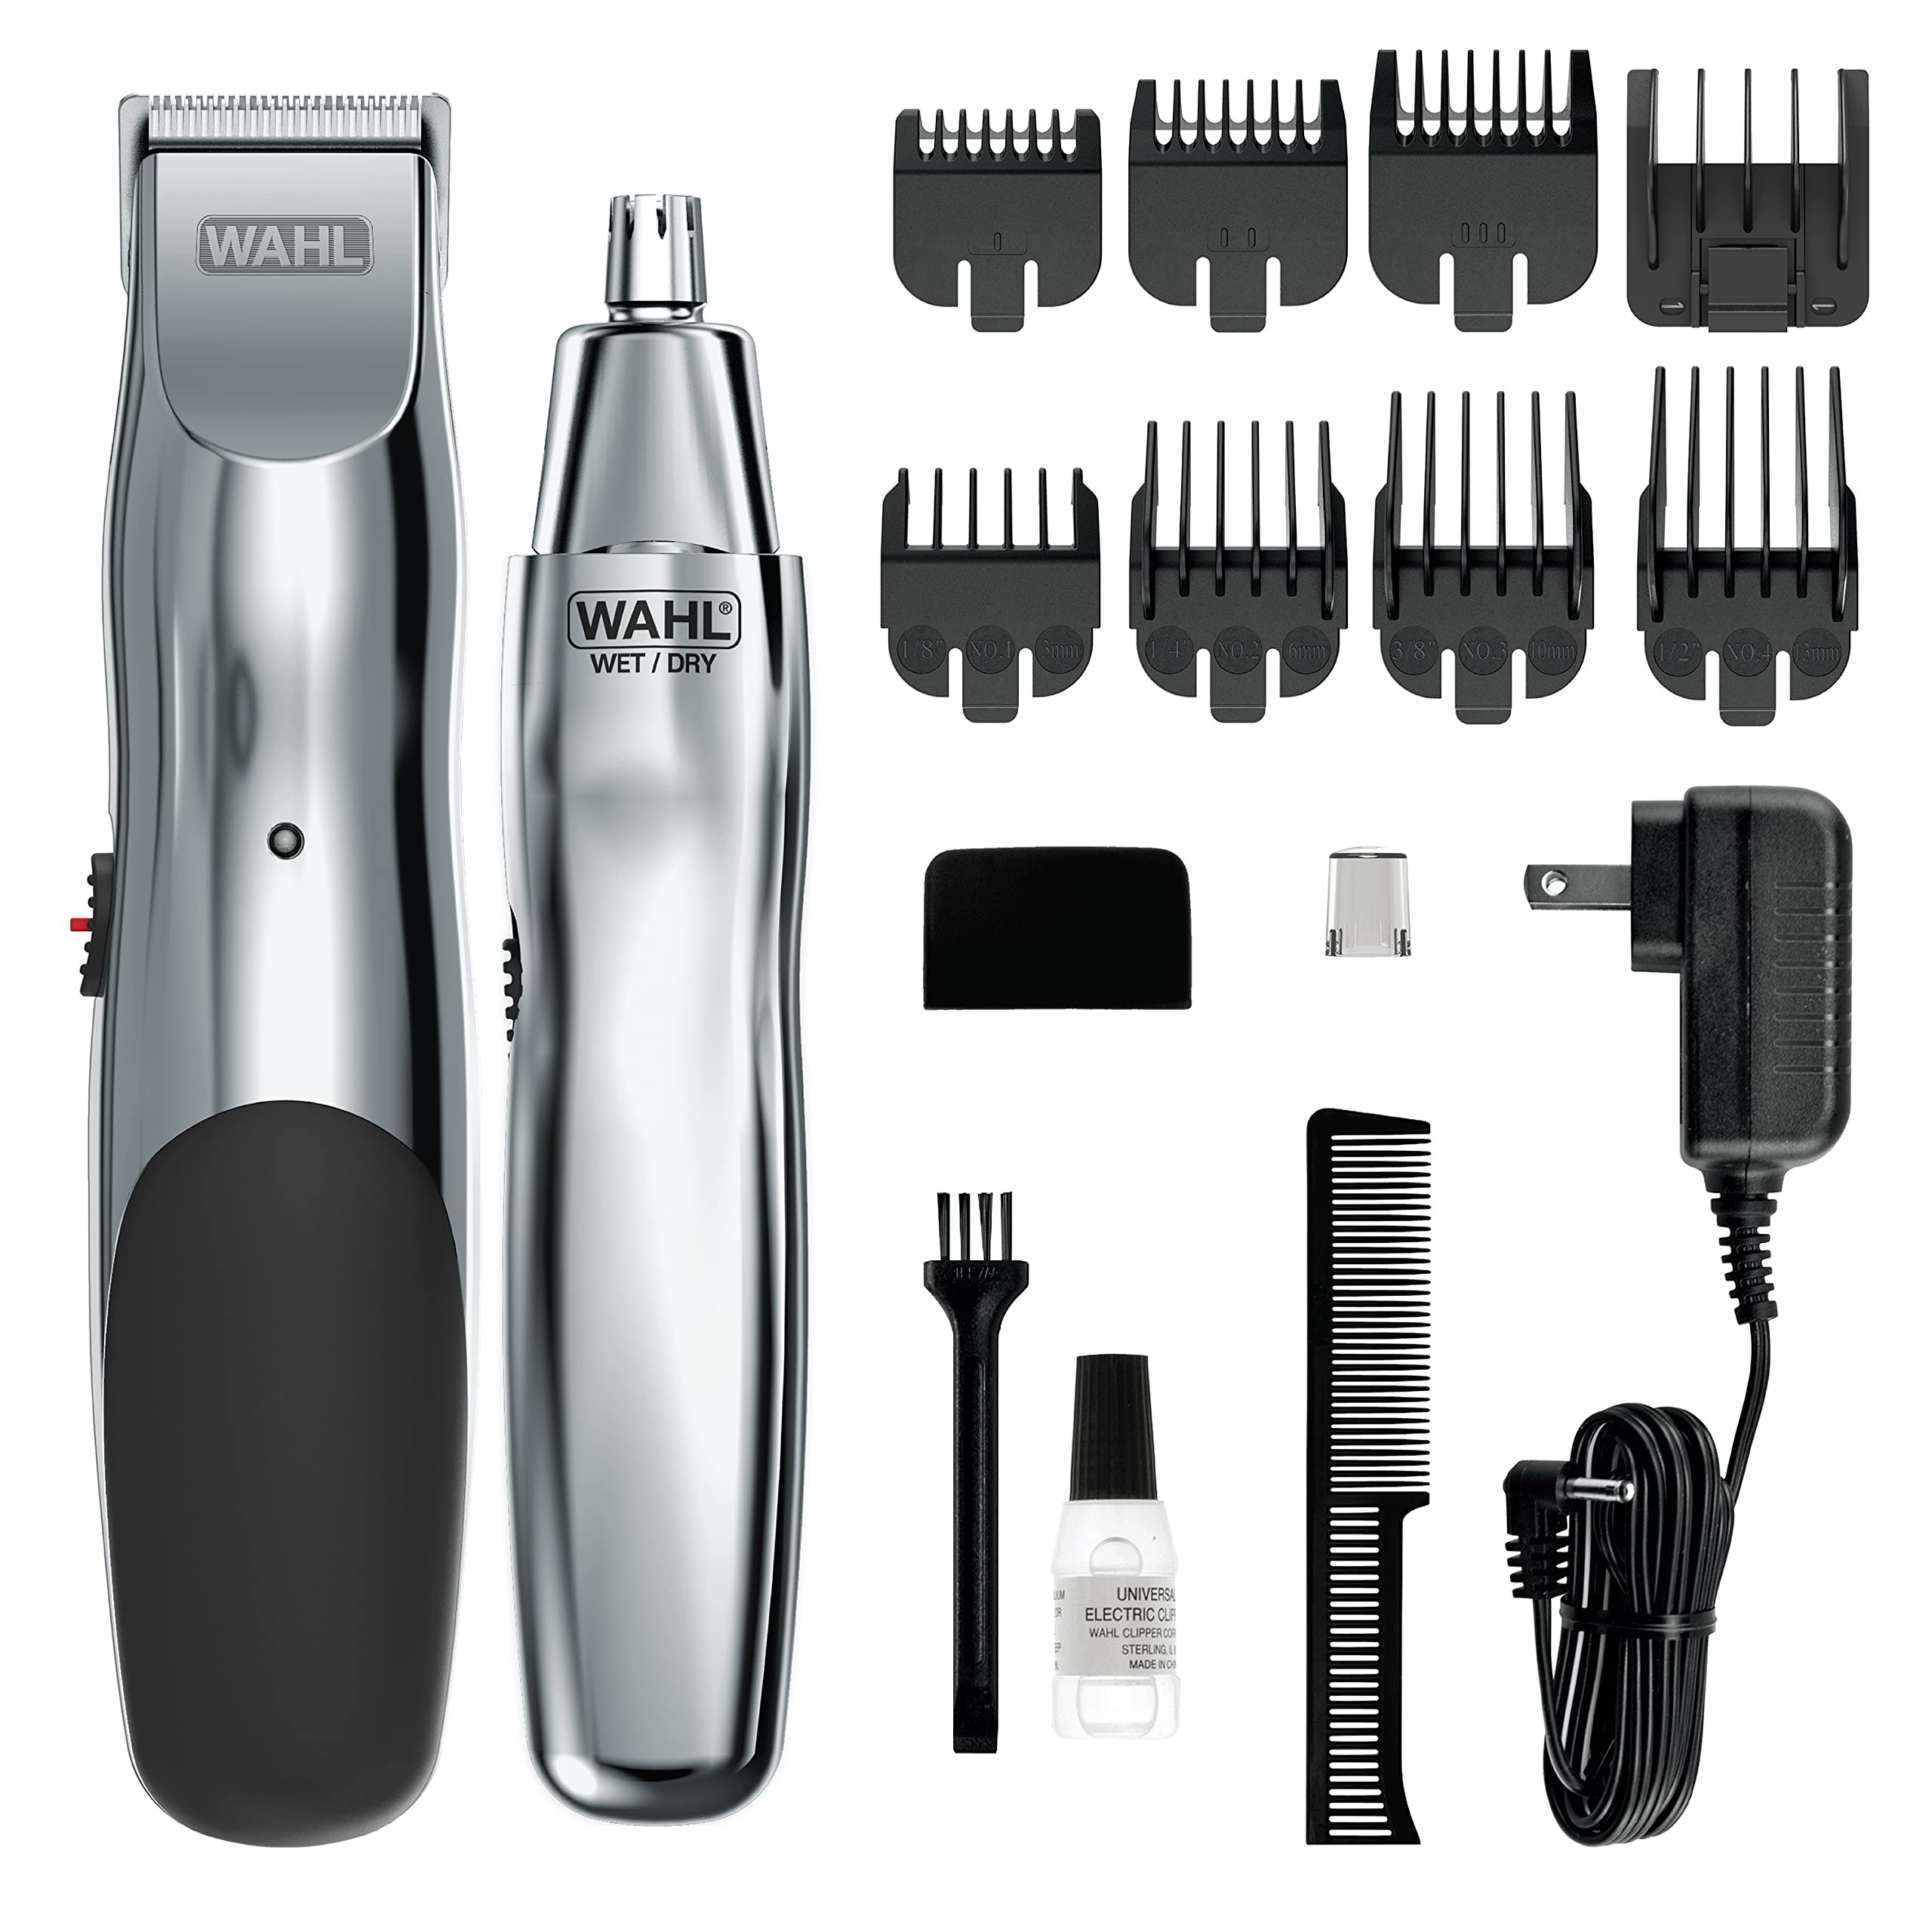 WAHL Groomsman Rechargeable Beard Trimmer kit for Mustaches, Nose Hair, and Light Detailing and Grooming with Bonus Wet/Dry Electric Nose Trimmer – Model 5622v